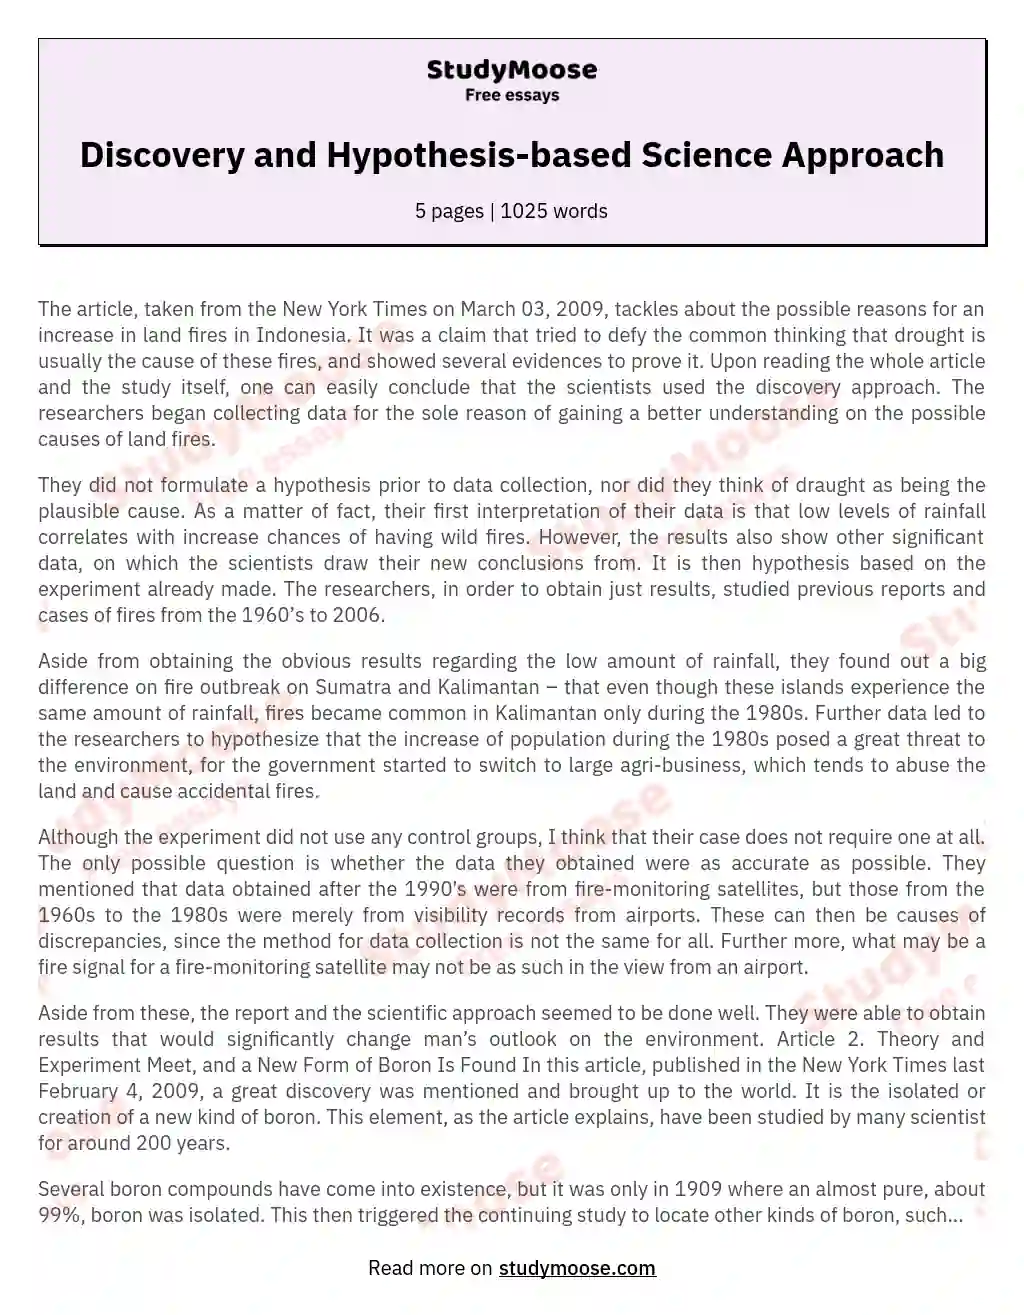 Discovery and Hypothesis-based Science Approach